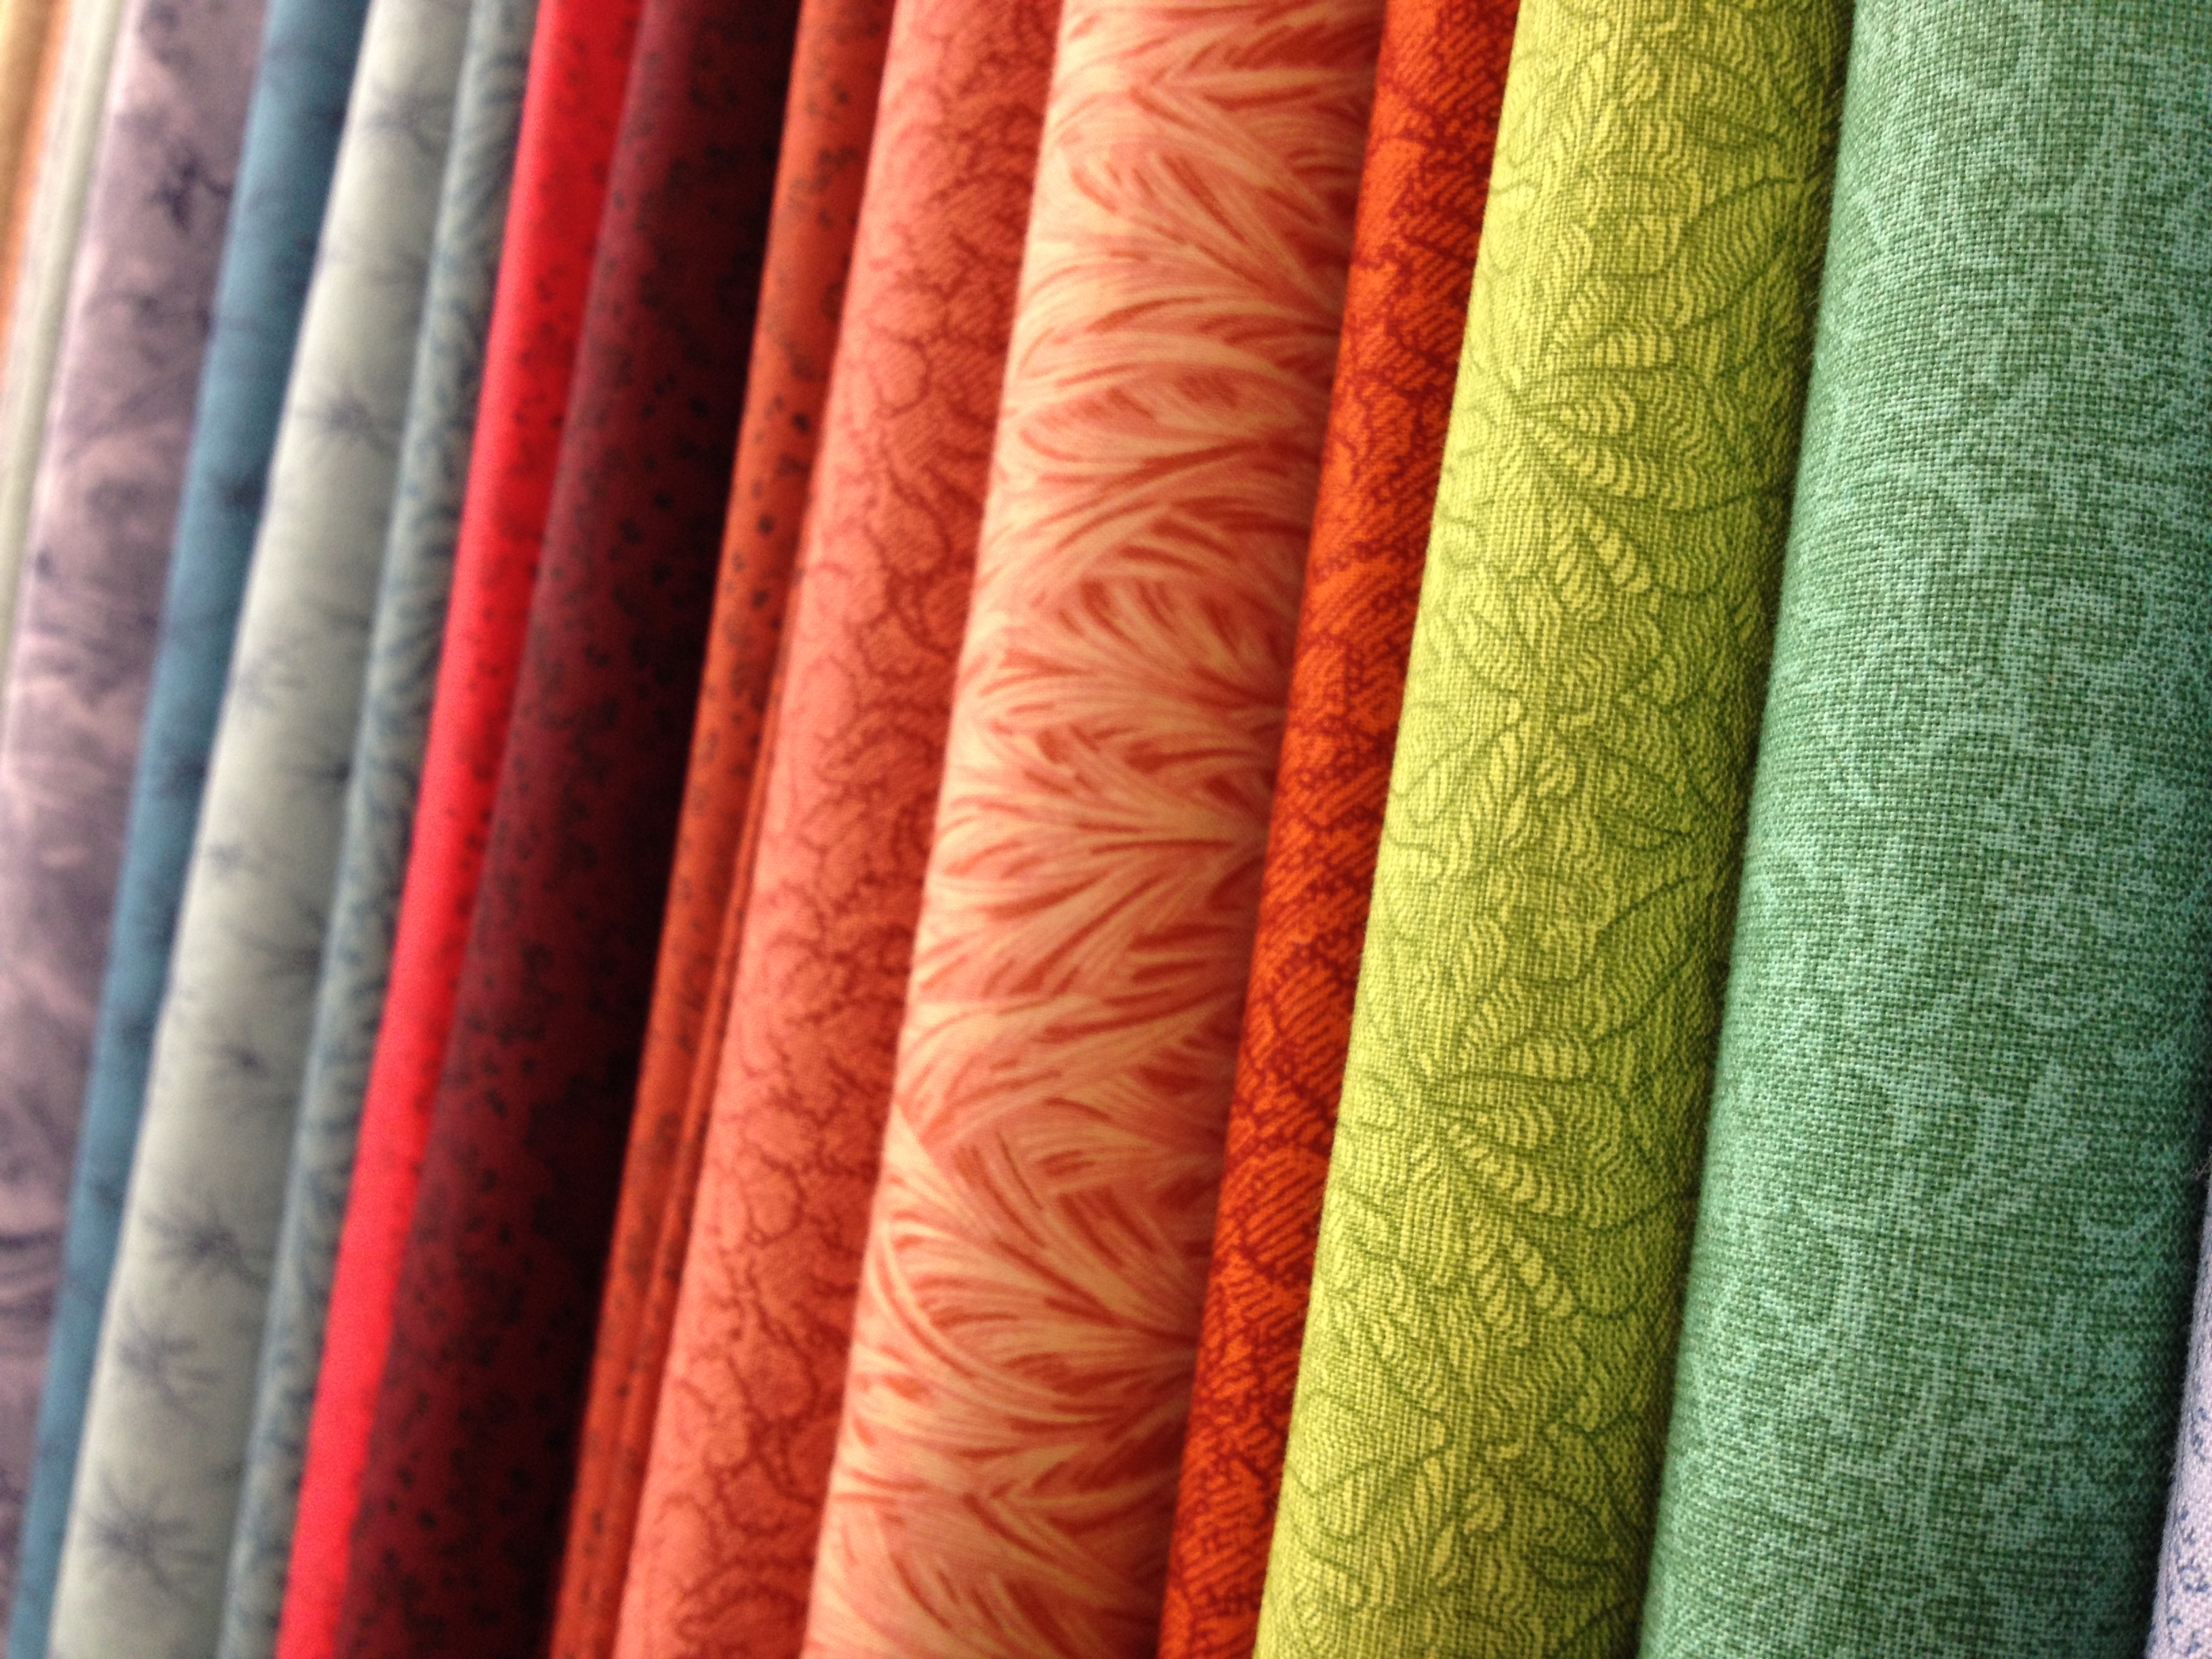 Free photo: Colorful fabric rolls - Sample, Paint, Palette ...
